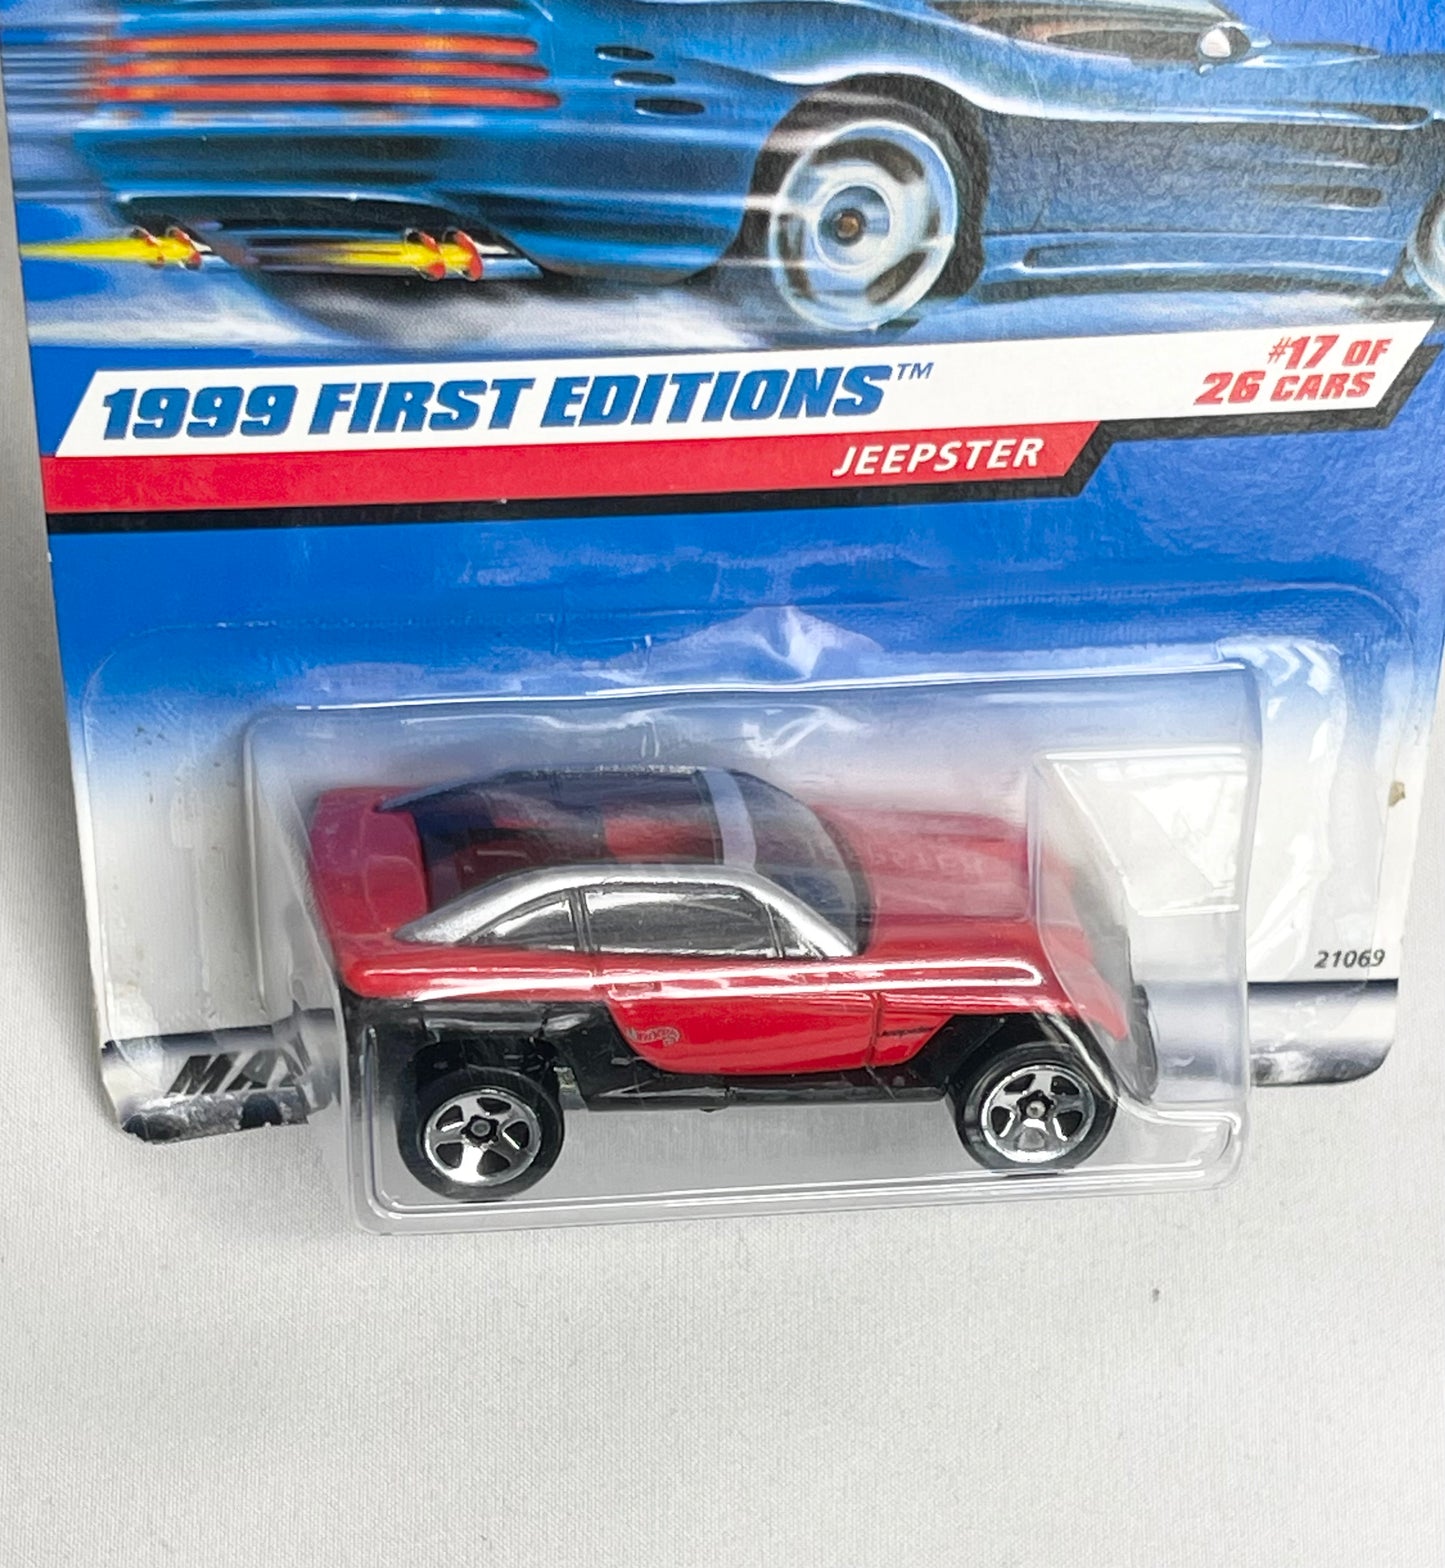 Hot Wheels 1999 First Editions Jeepster